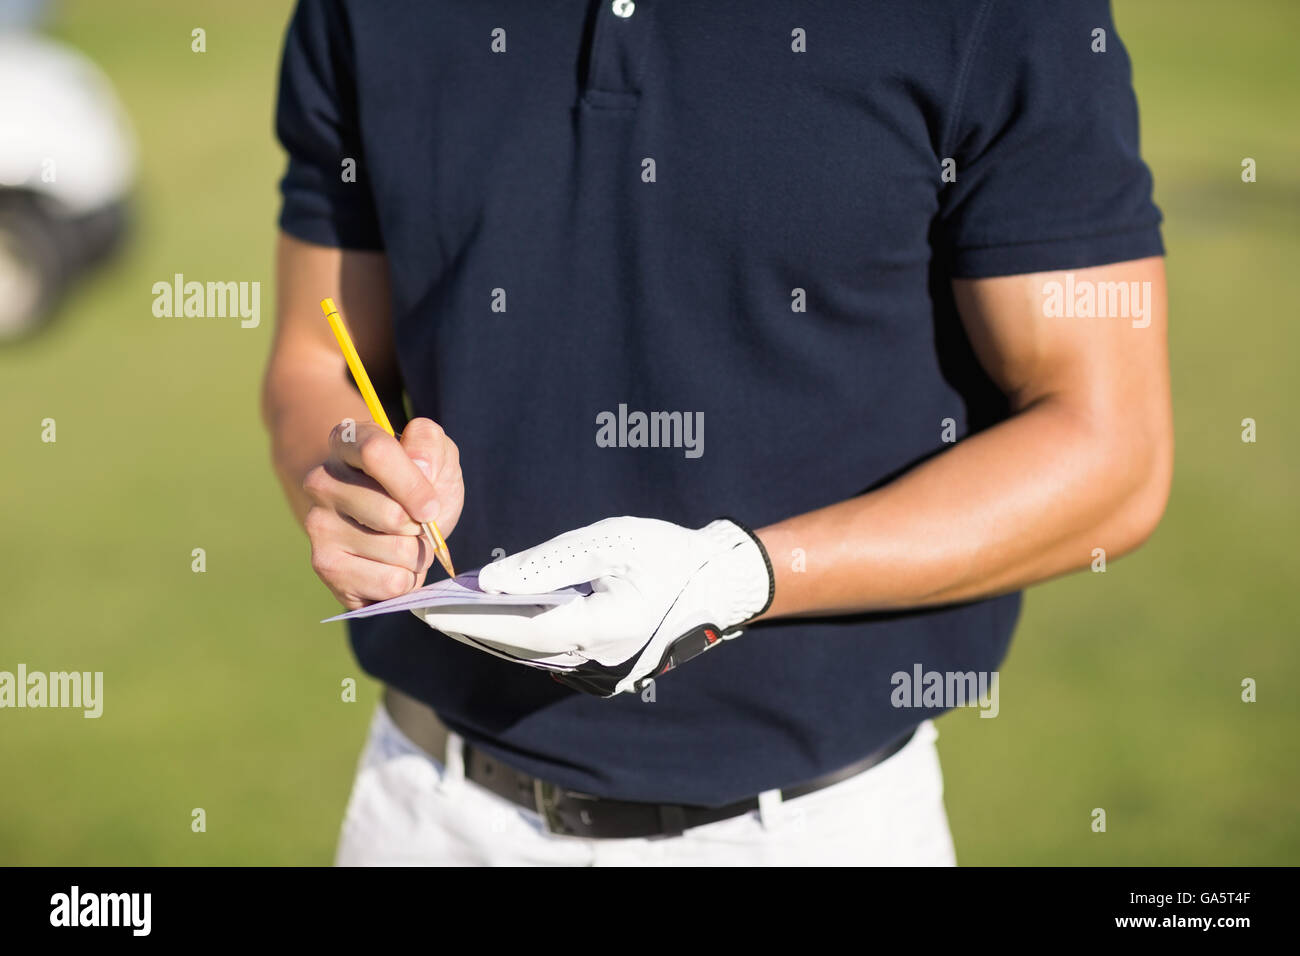 Midsection of golfer writing on score card Stock Photo